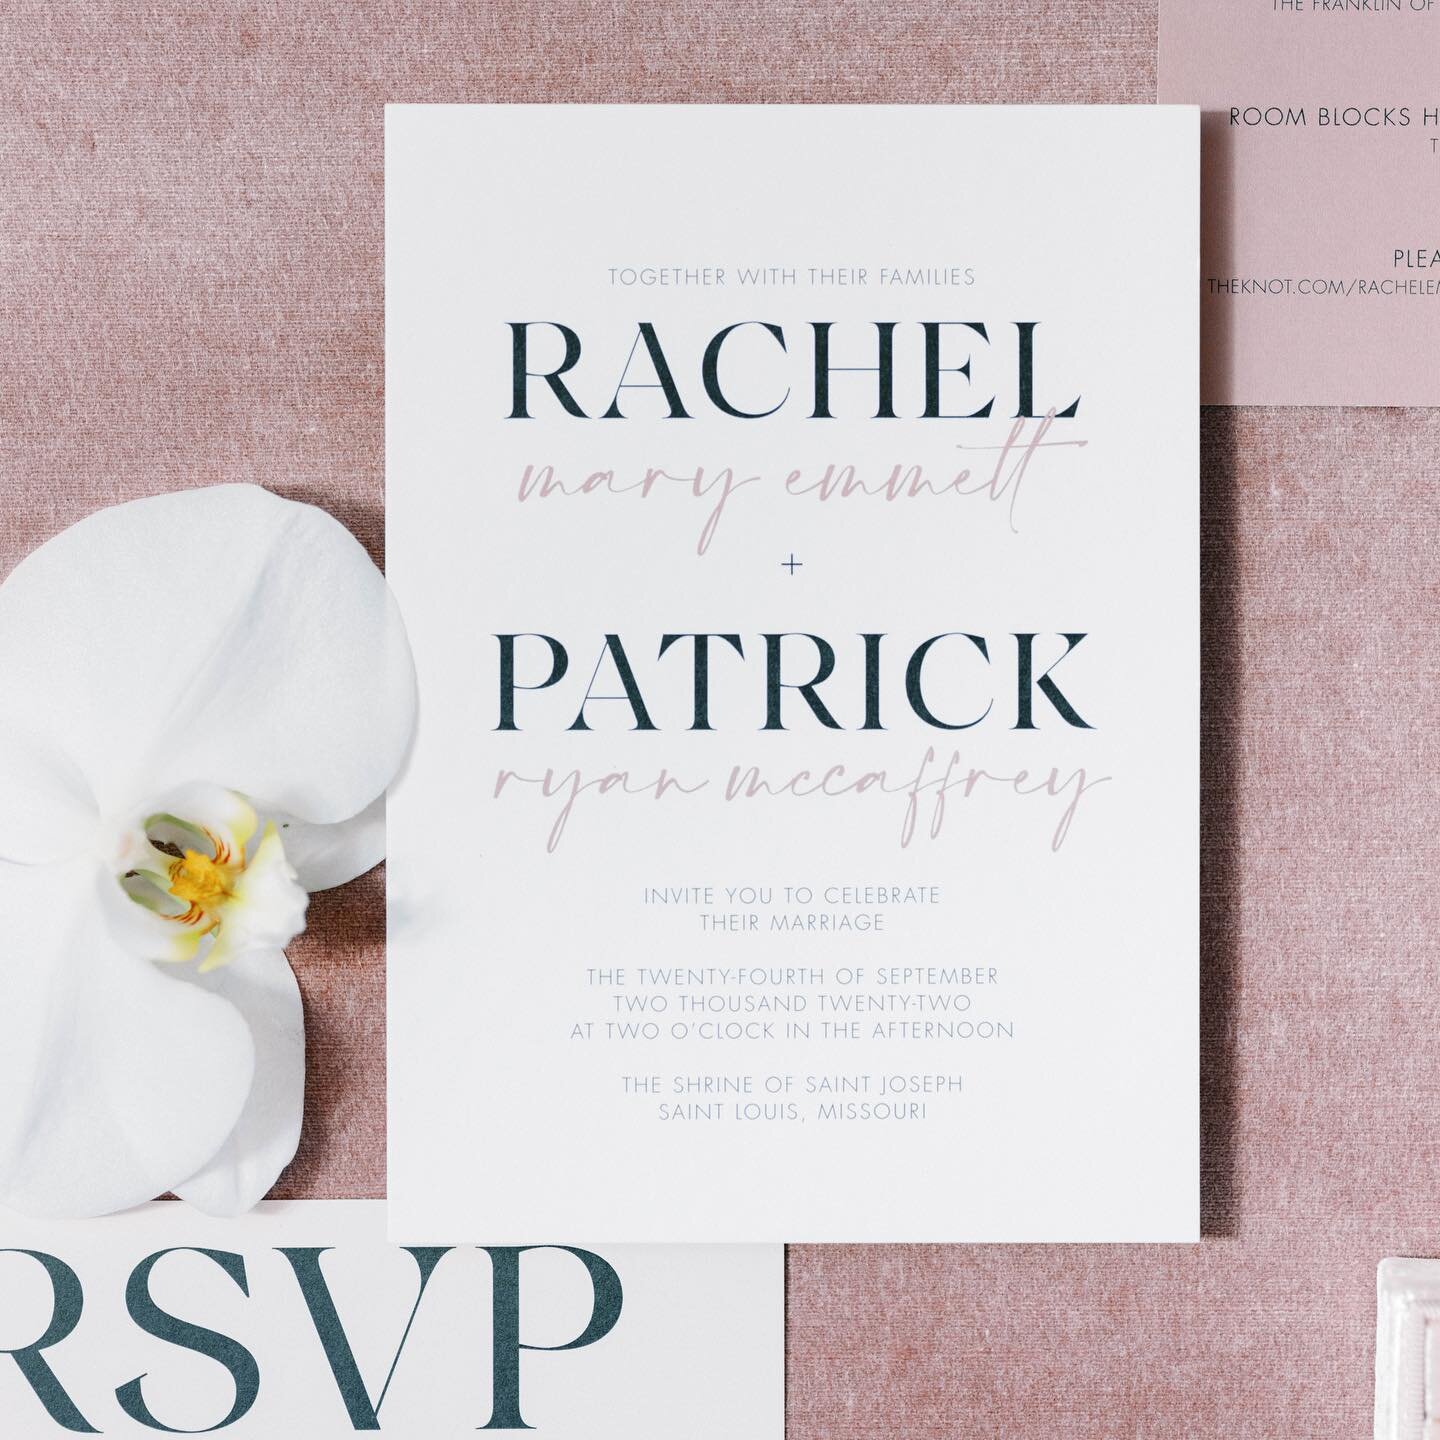 Oh so elegant + modern. 🤍
&bull;
&bull;
&bull;
Loved working with @rachemmett on her and Patrick&rsquo;s wedding! Rachel has an eye for detail and wanted to keep everything clean, cohesive, and super cool. (Emphasis on super cool&hellip;I have insta